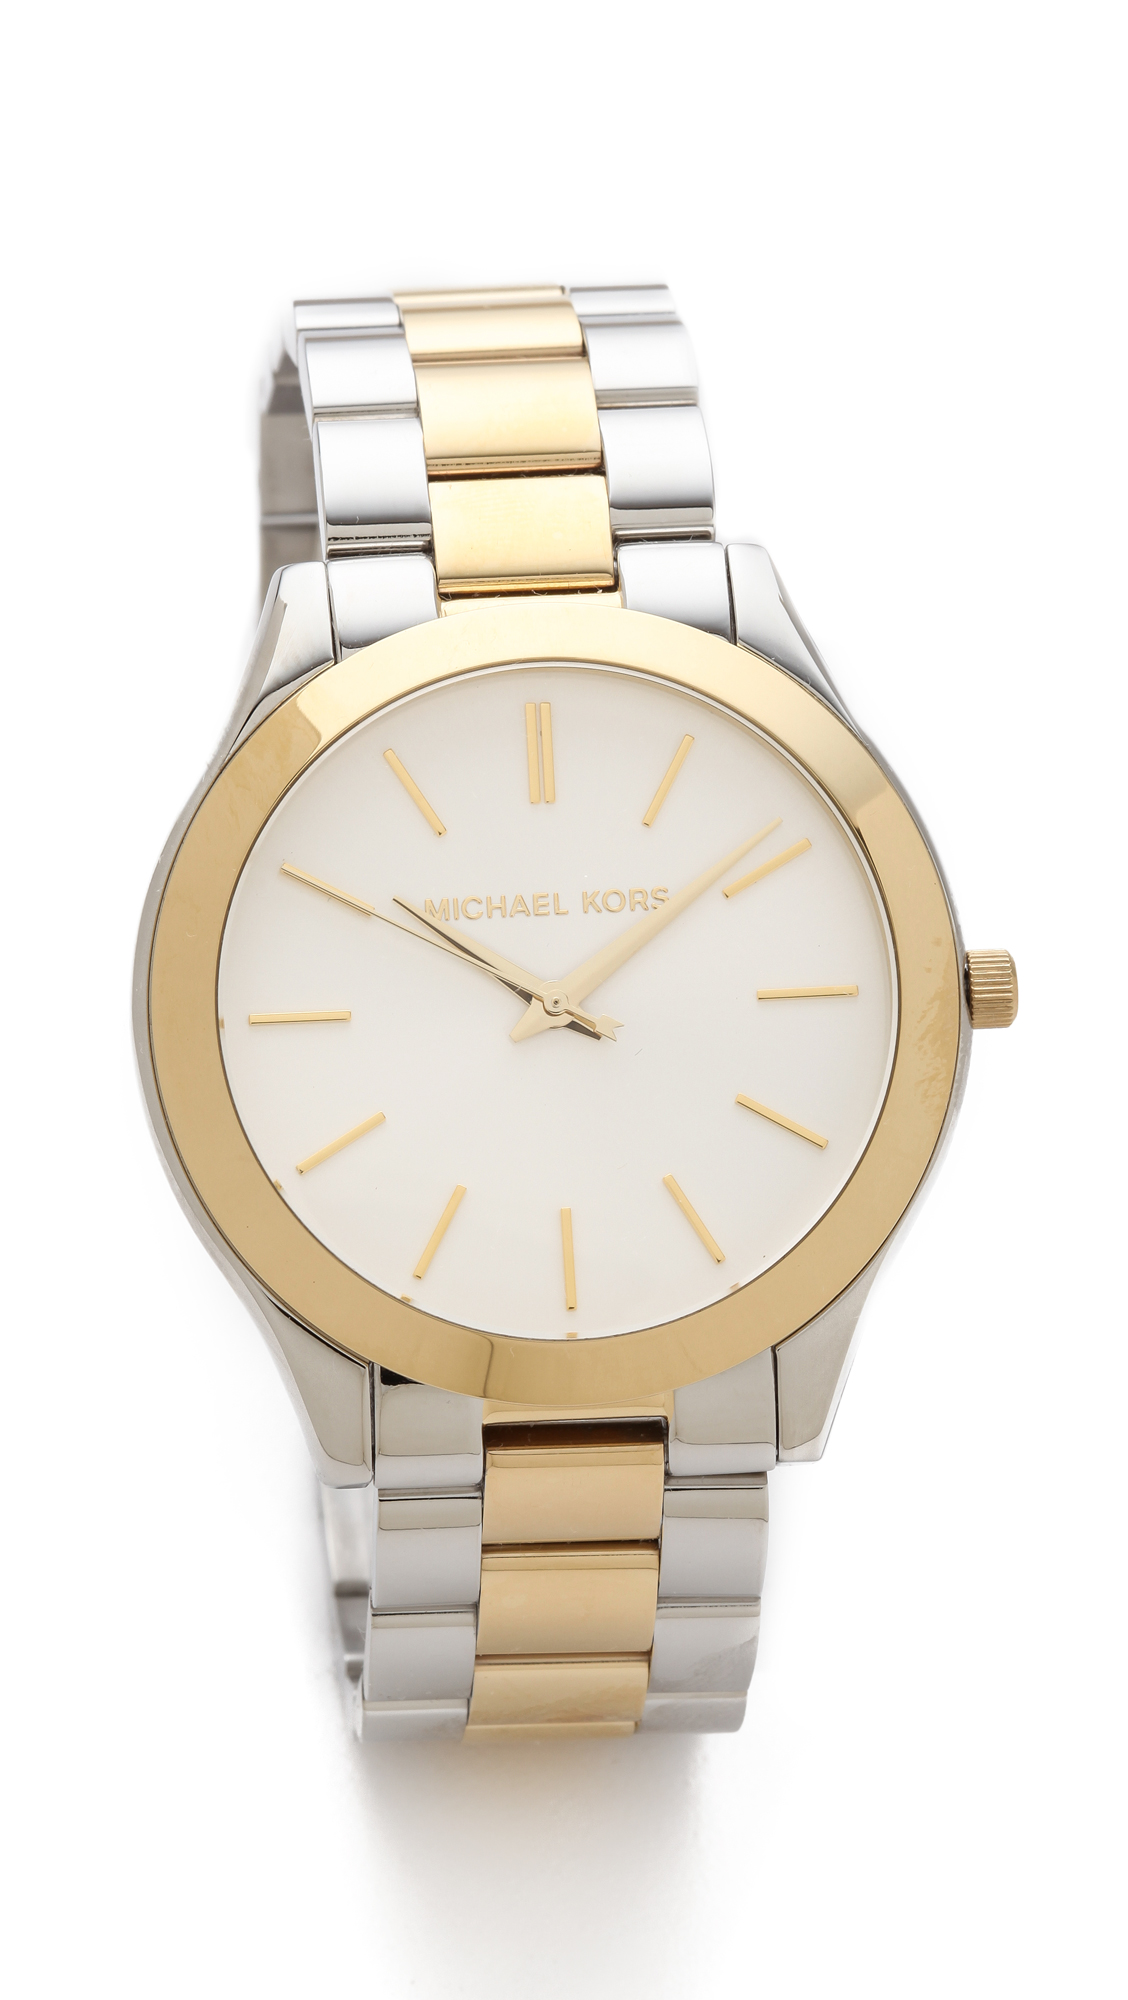 Michael Kors Jewellery and Watches